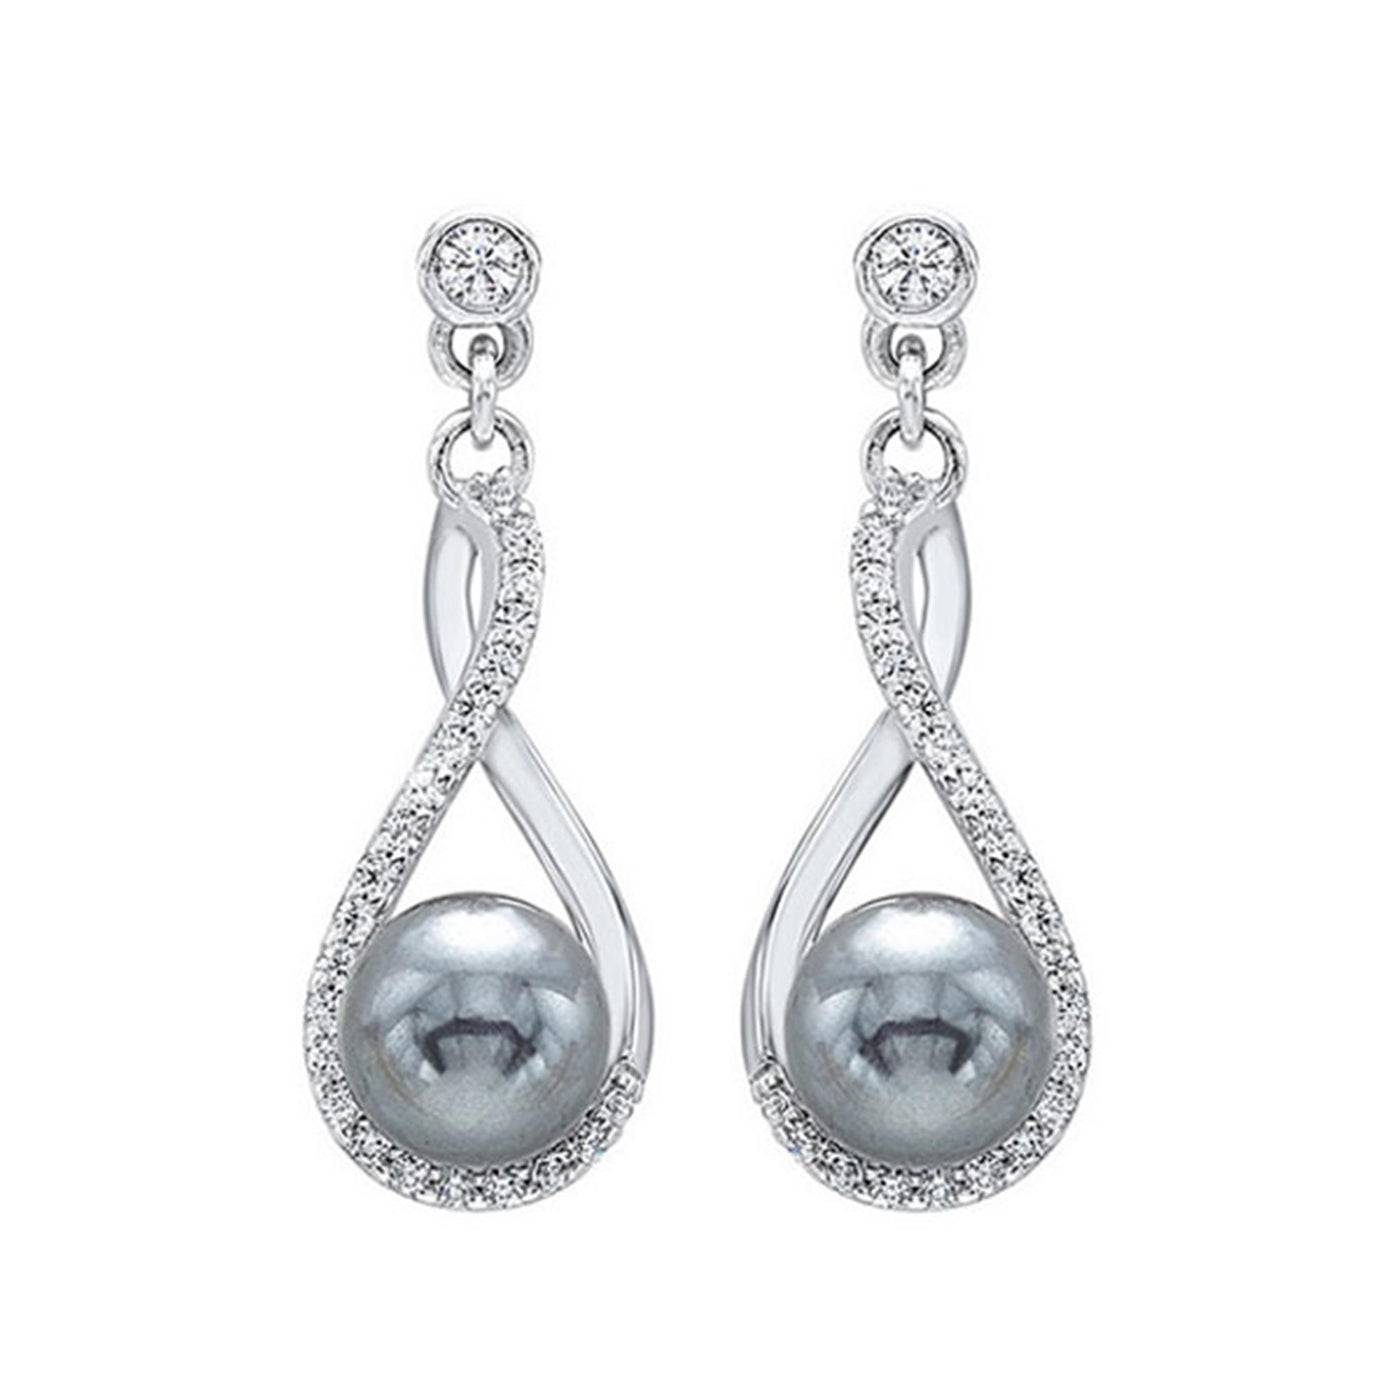 One Pair of Sterling Silver Dangle Style Earrings Featuring Grey Simulated Shell Pearls